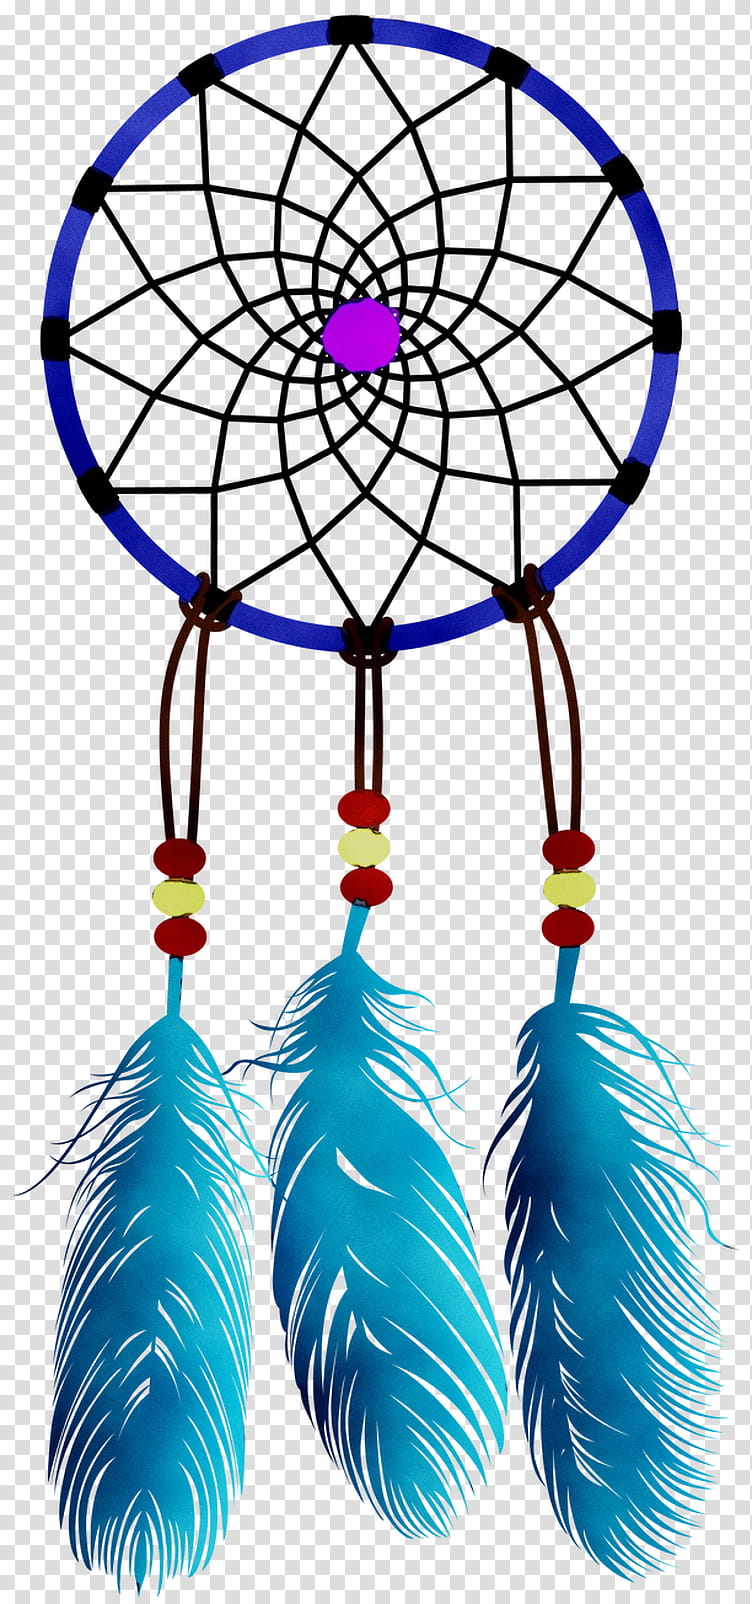 Wind, Dreamcatcher, Talisman Dreamcatcher, Feather, Cutie Mark Crusaders, Wind Chimes, Mylittlepony, Turquoise transparent background PNG clipart